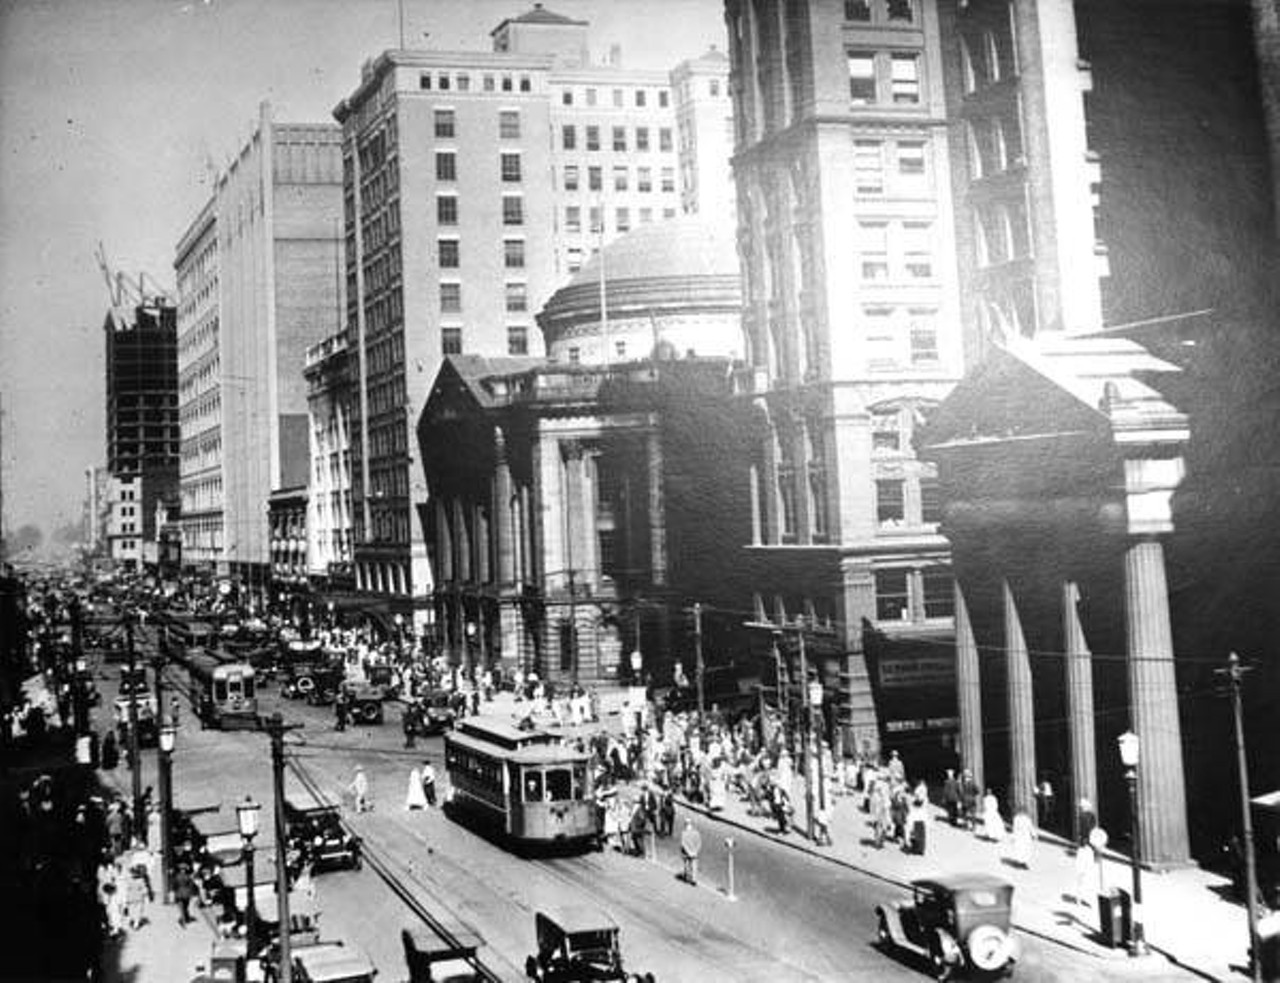 Trolley cars at Euclid and East 9th St., Hanna Building visible, 1921